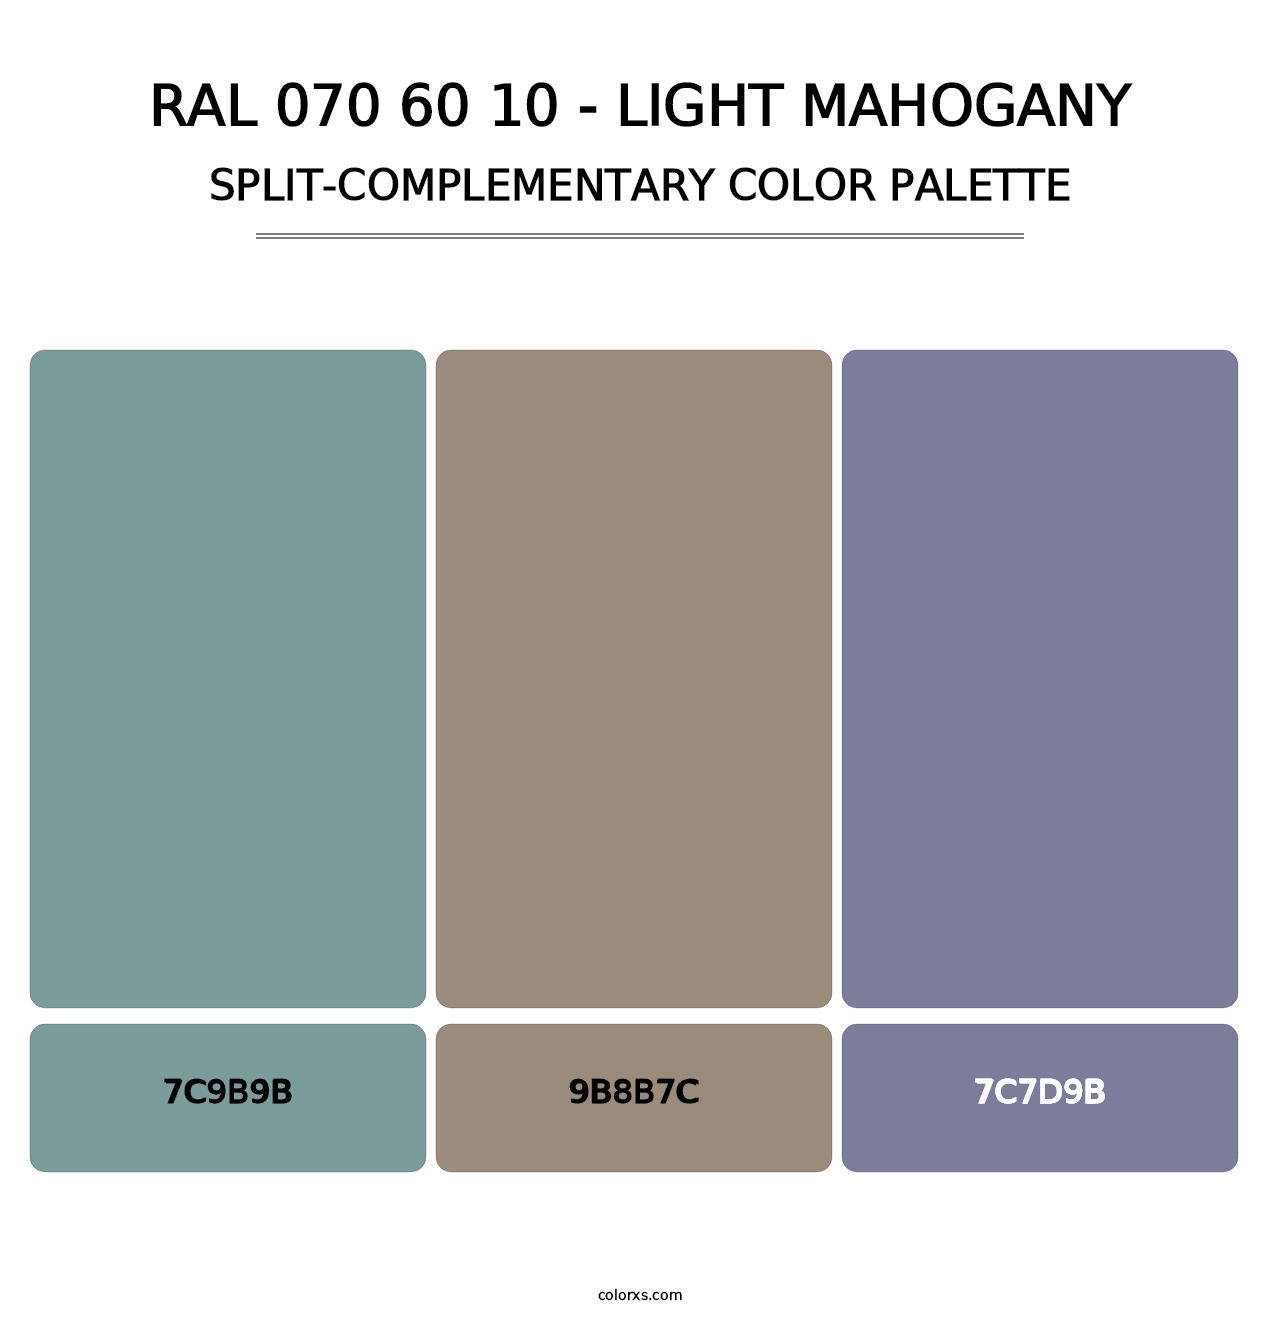 RAL 070 60 10 - Light Mahogany - Split-Complementary Color Palette